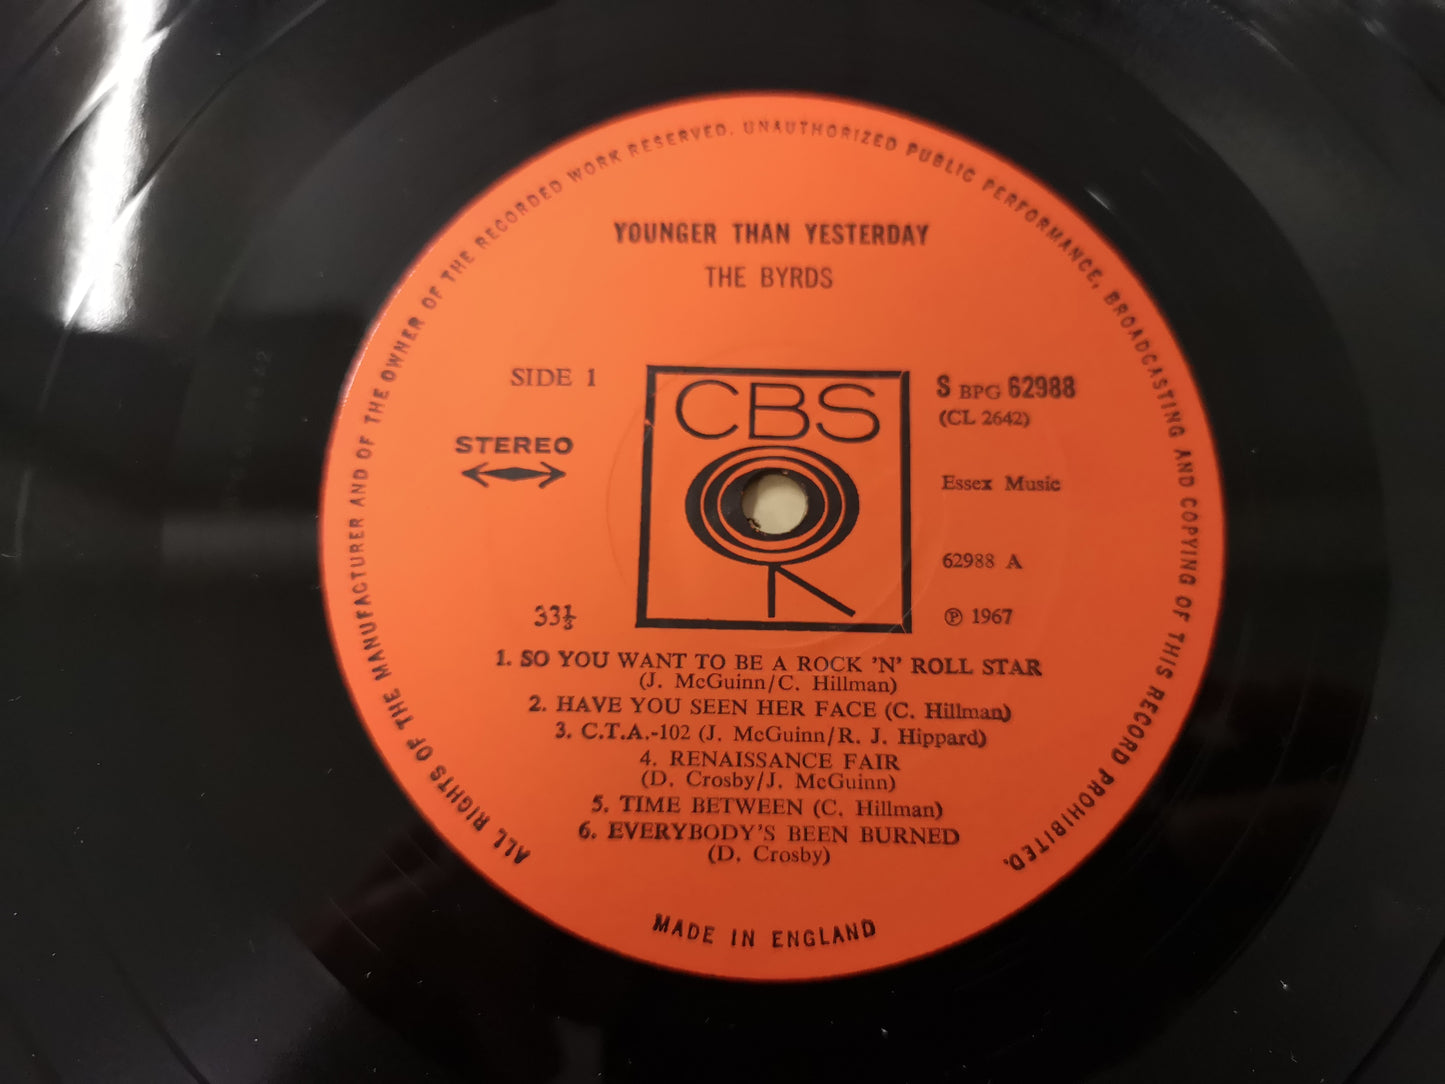 Byrds "Younger than Yesterday" Orig UK Stereo 1967 VG++/M-